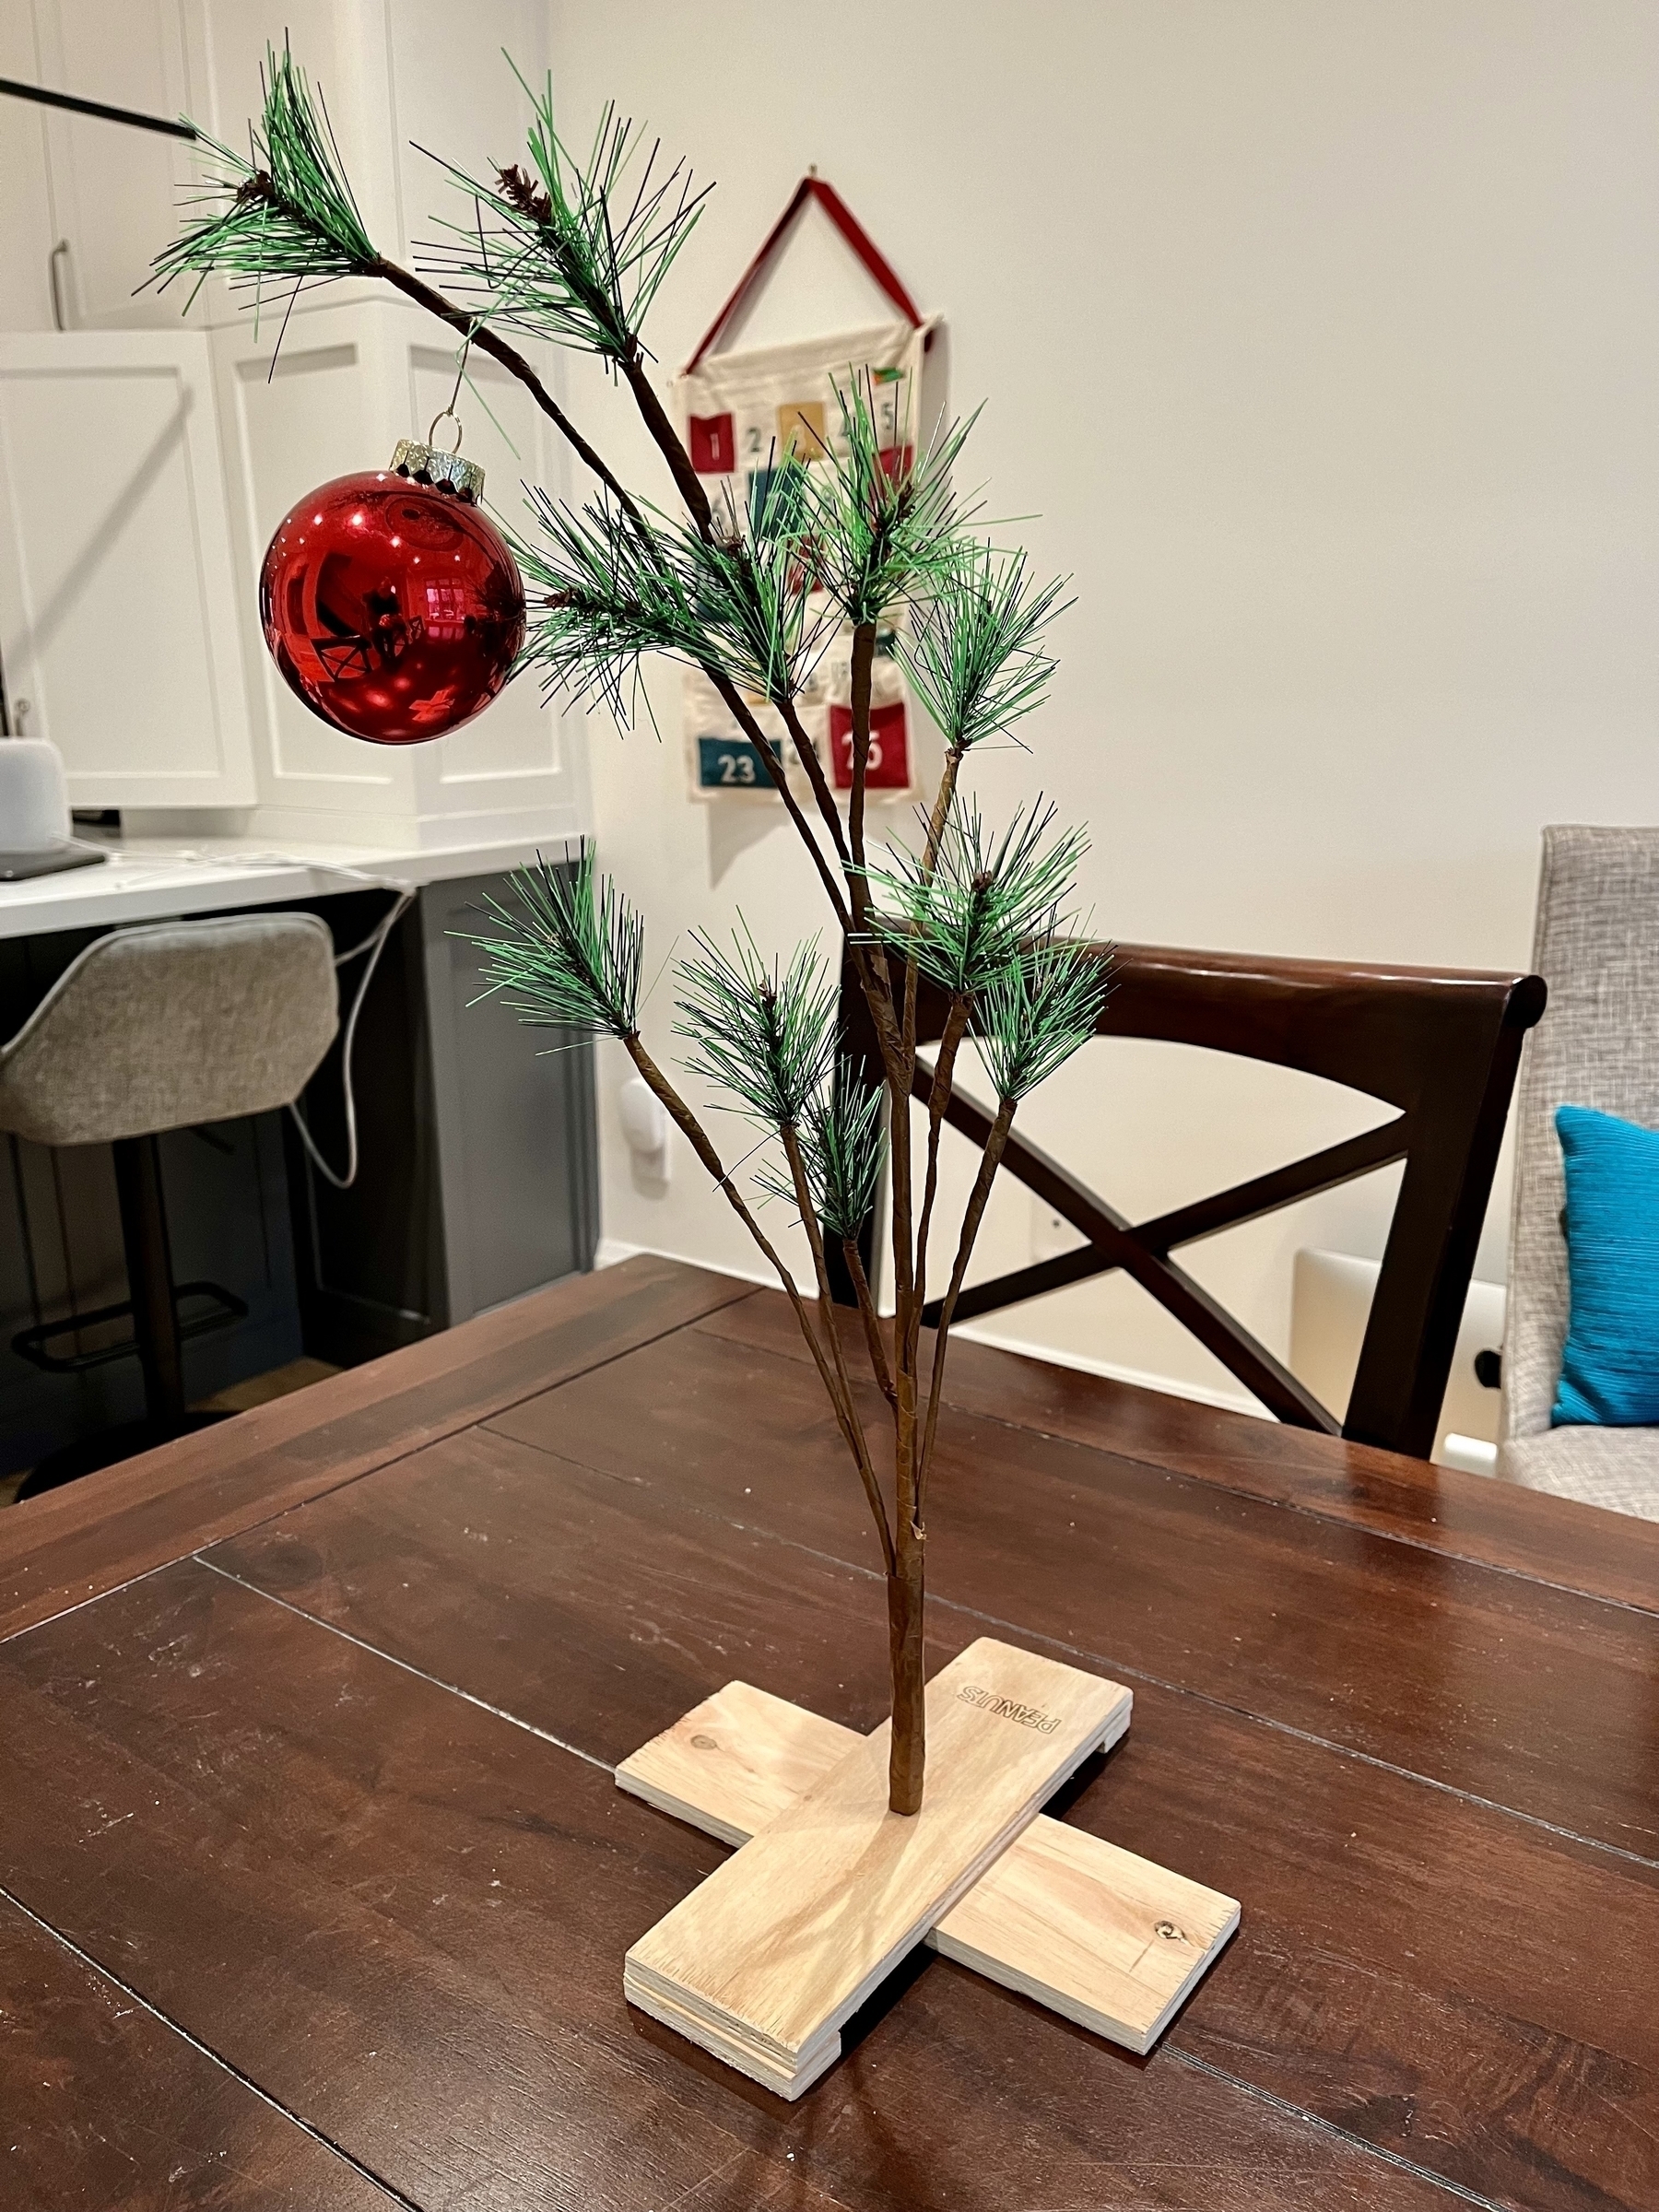 Charlie Brown novelty tree. Very spindly with a single drooping ornament